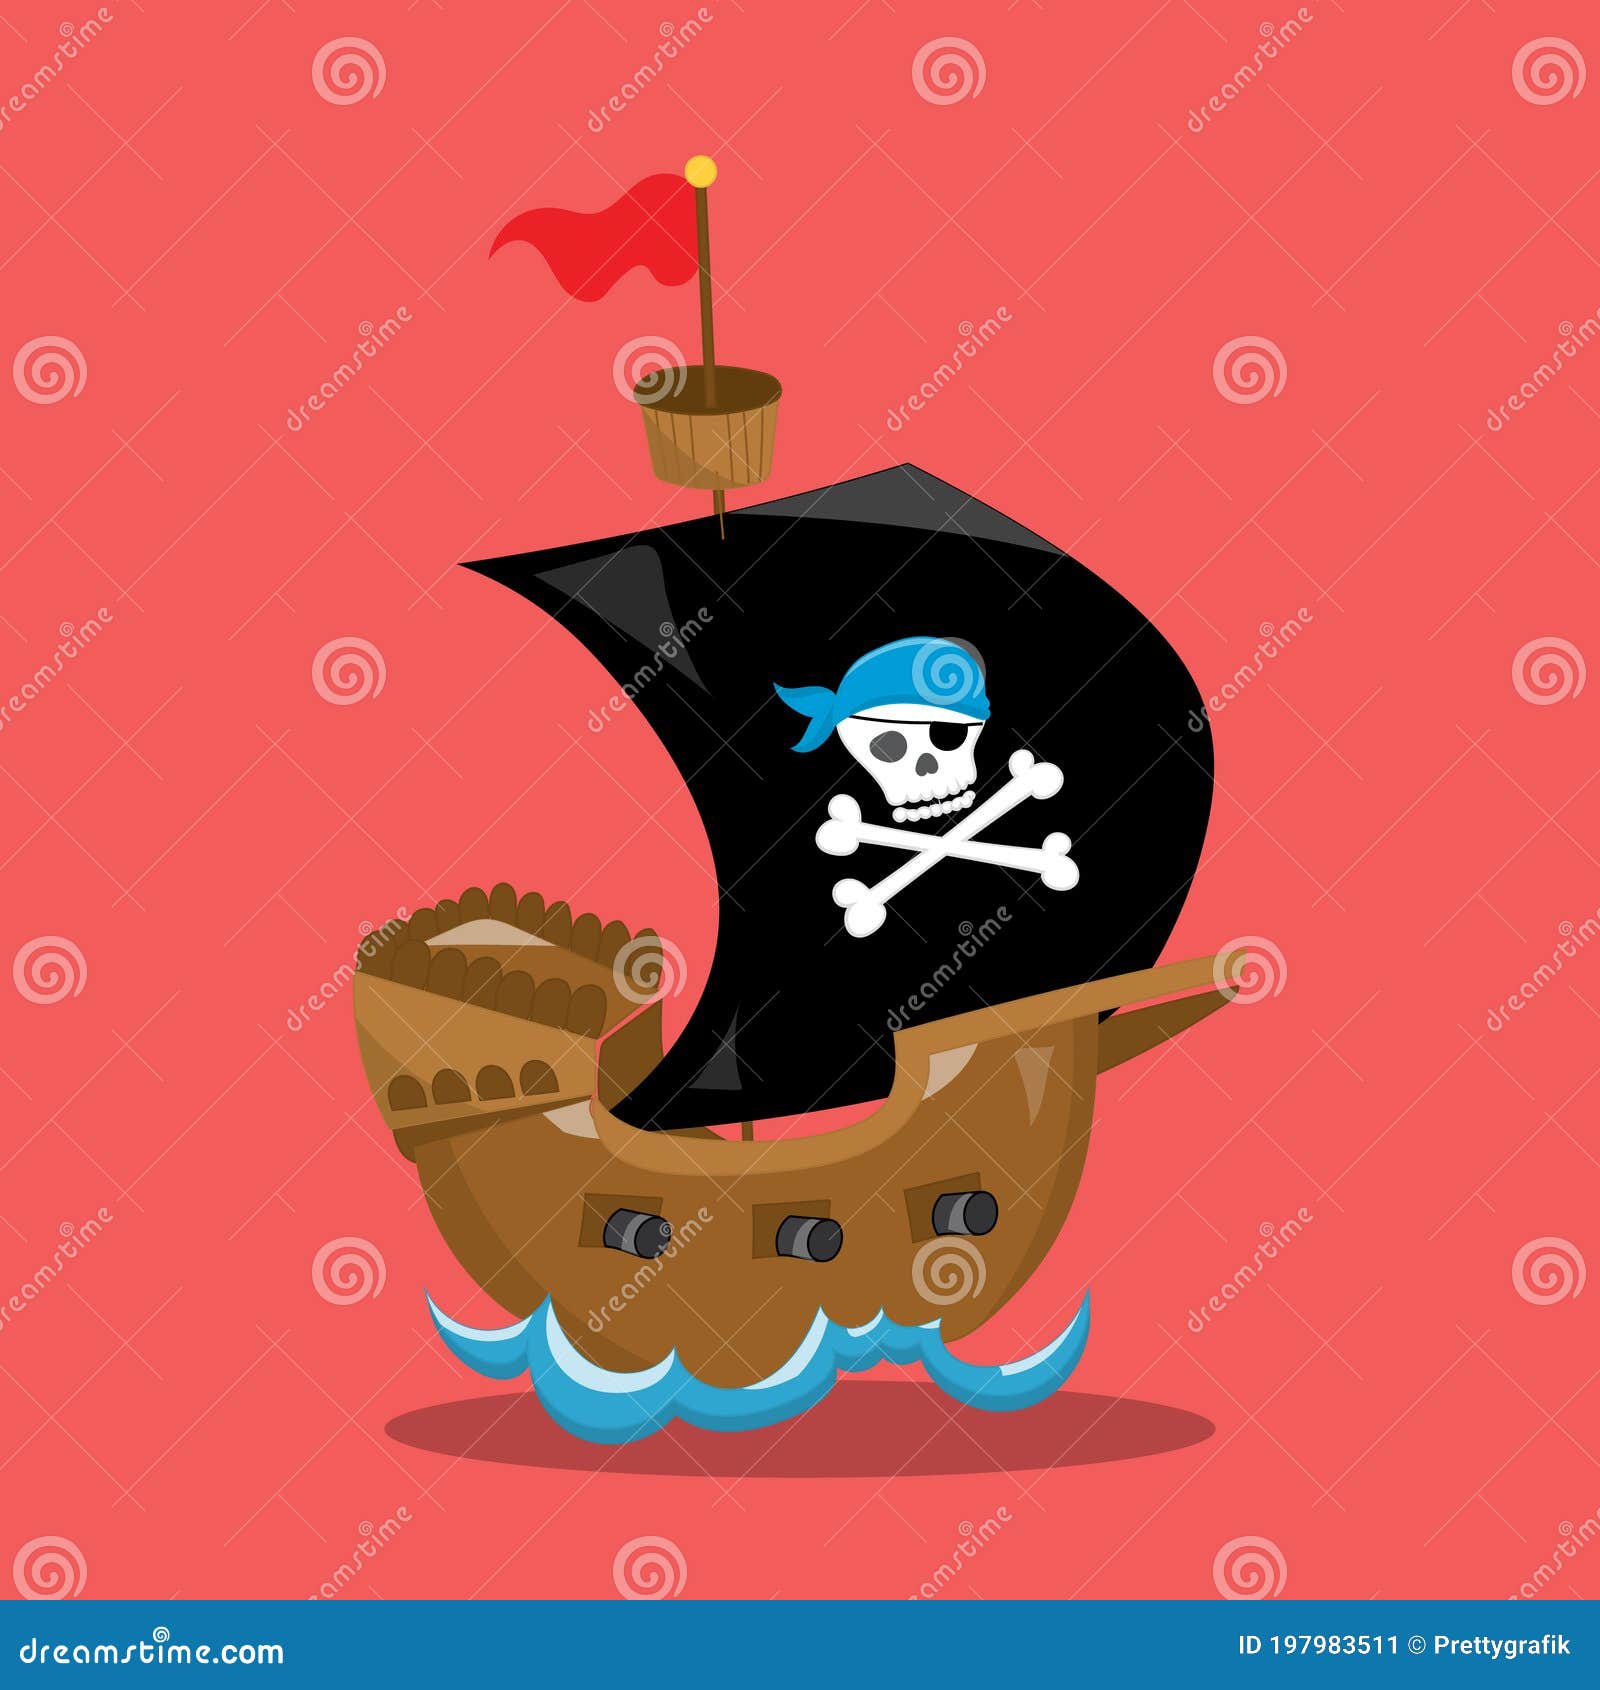 CUTE PIRATE SHIP 07 stock vector. Illustration of graphic - 197983511